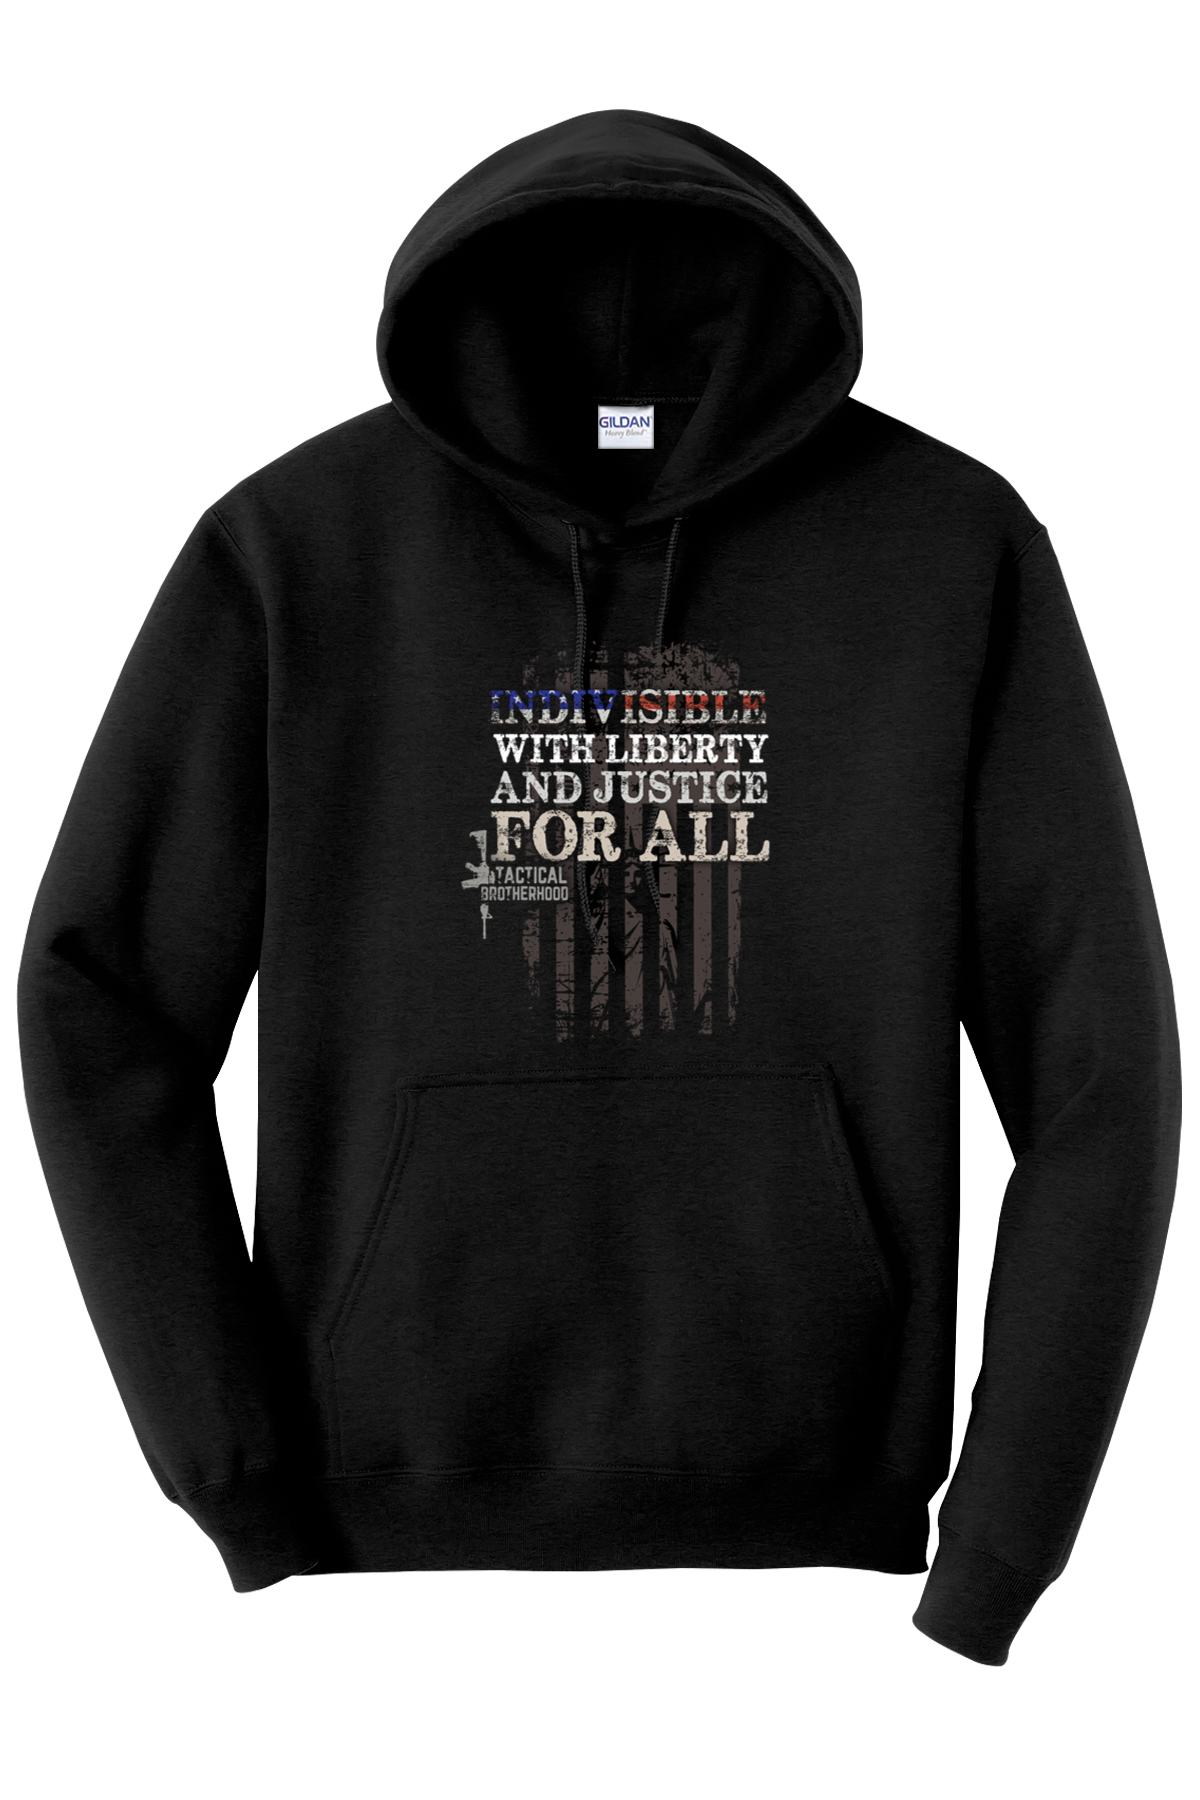 Indivisible Hoodie